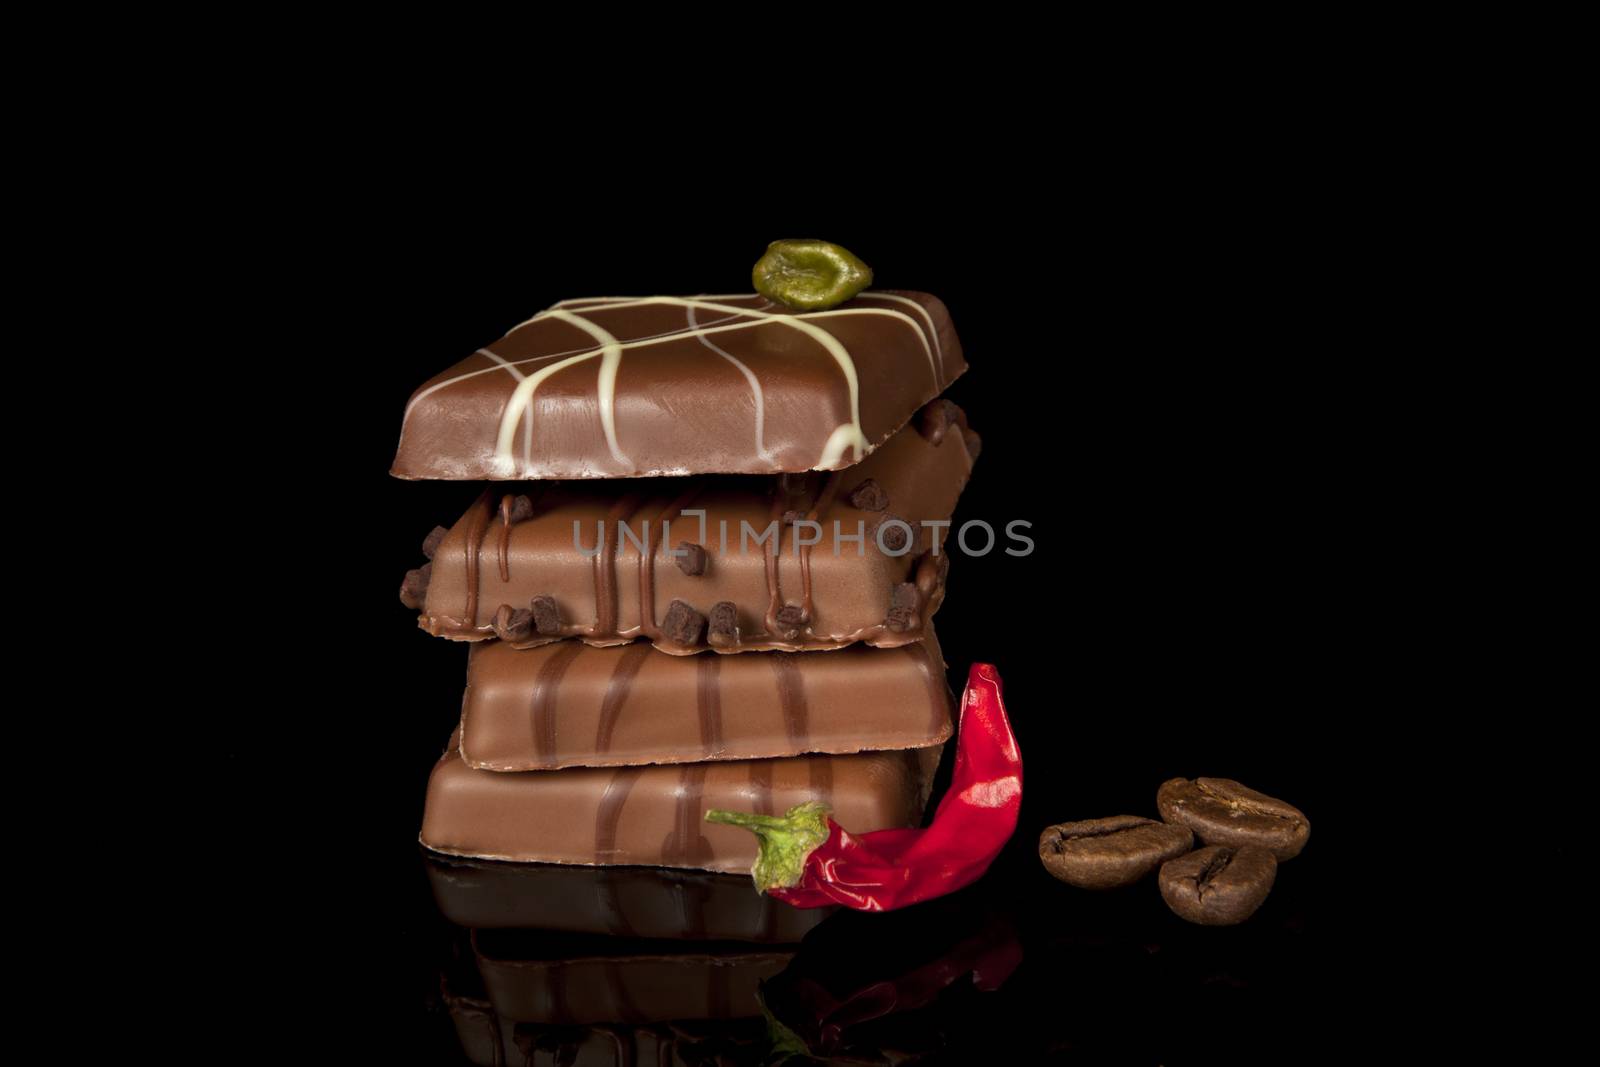 luxurious chocolate with chilli pepper by eskymaks